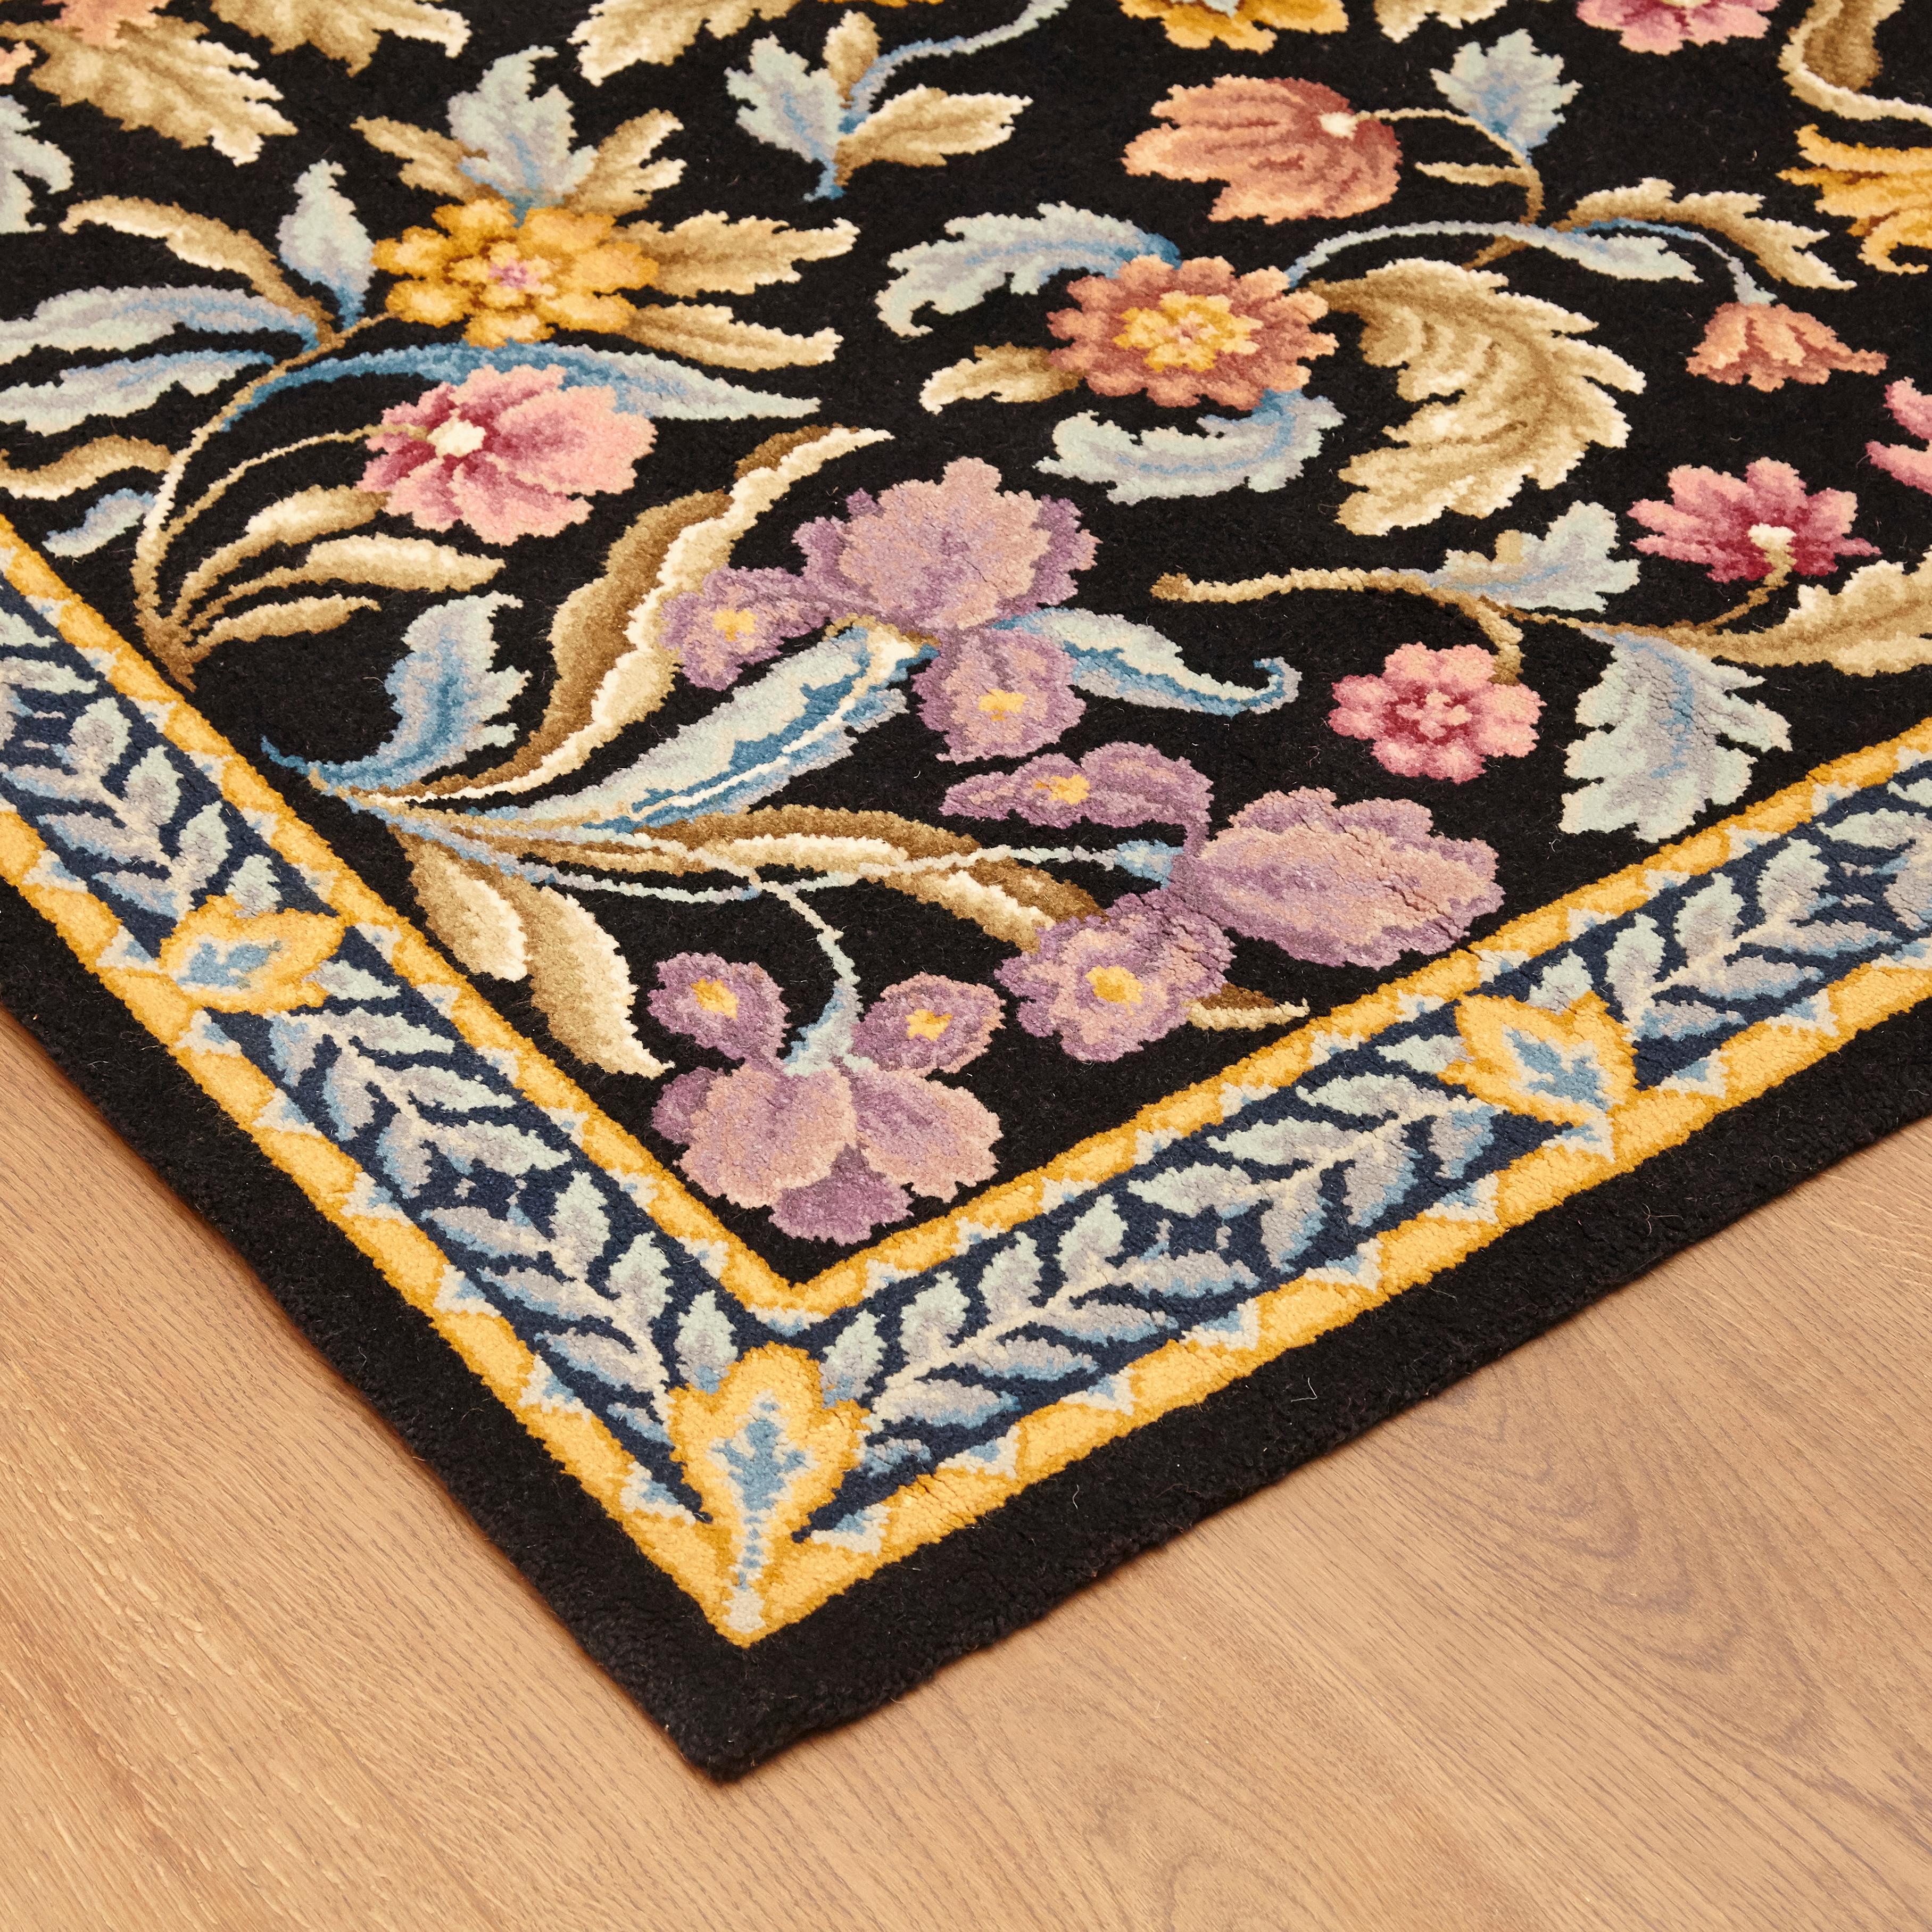 Louis XIV style rug made in Spain in 1980

Hand knotted wool

Measures: 250 x 340 cm, circa 1980.